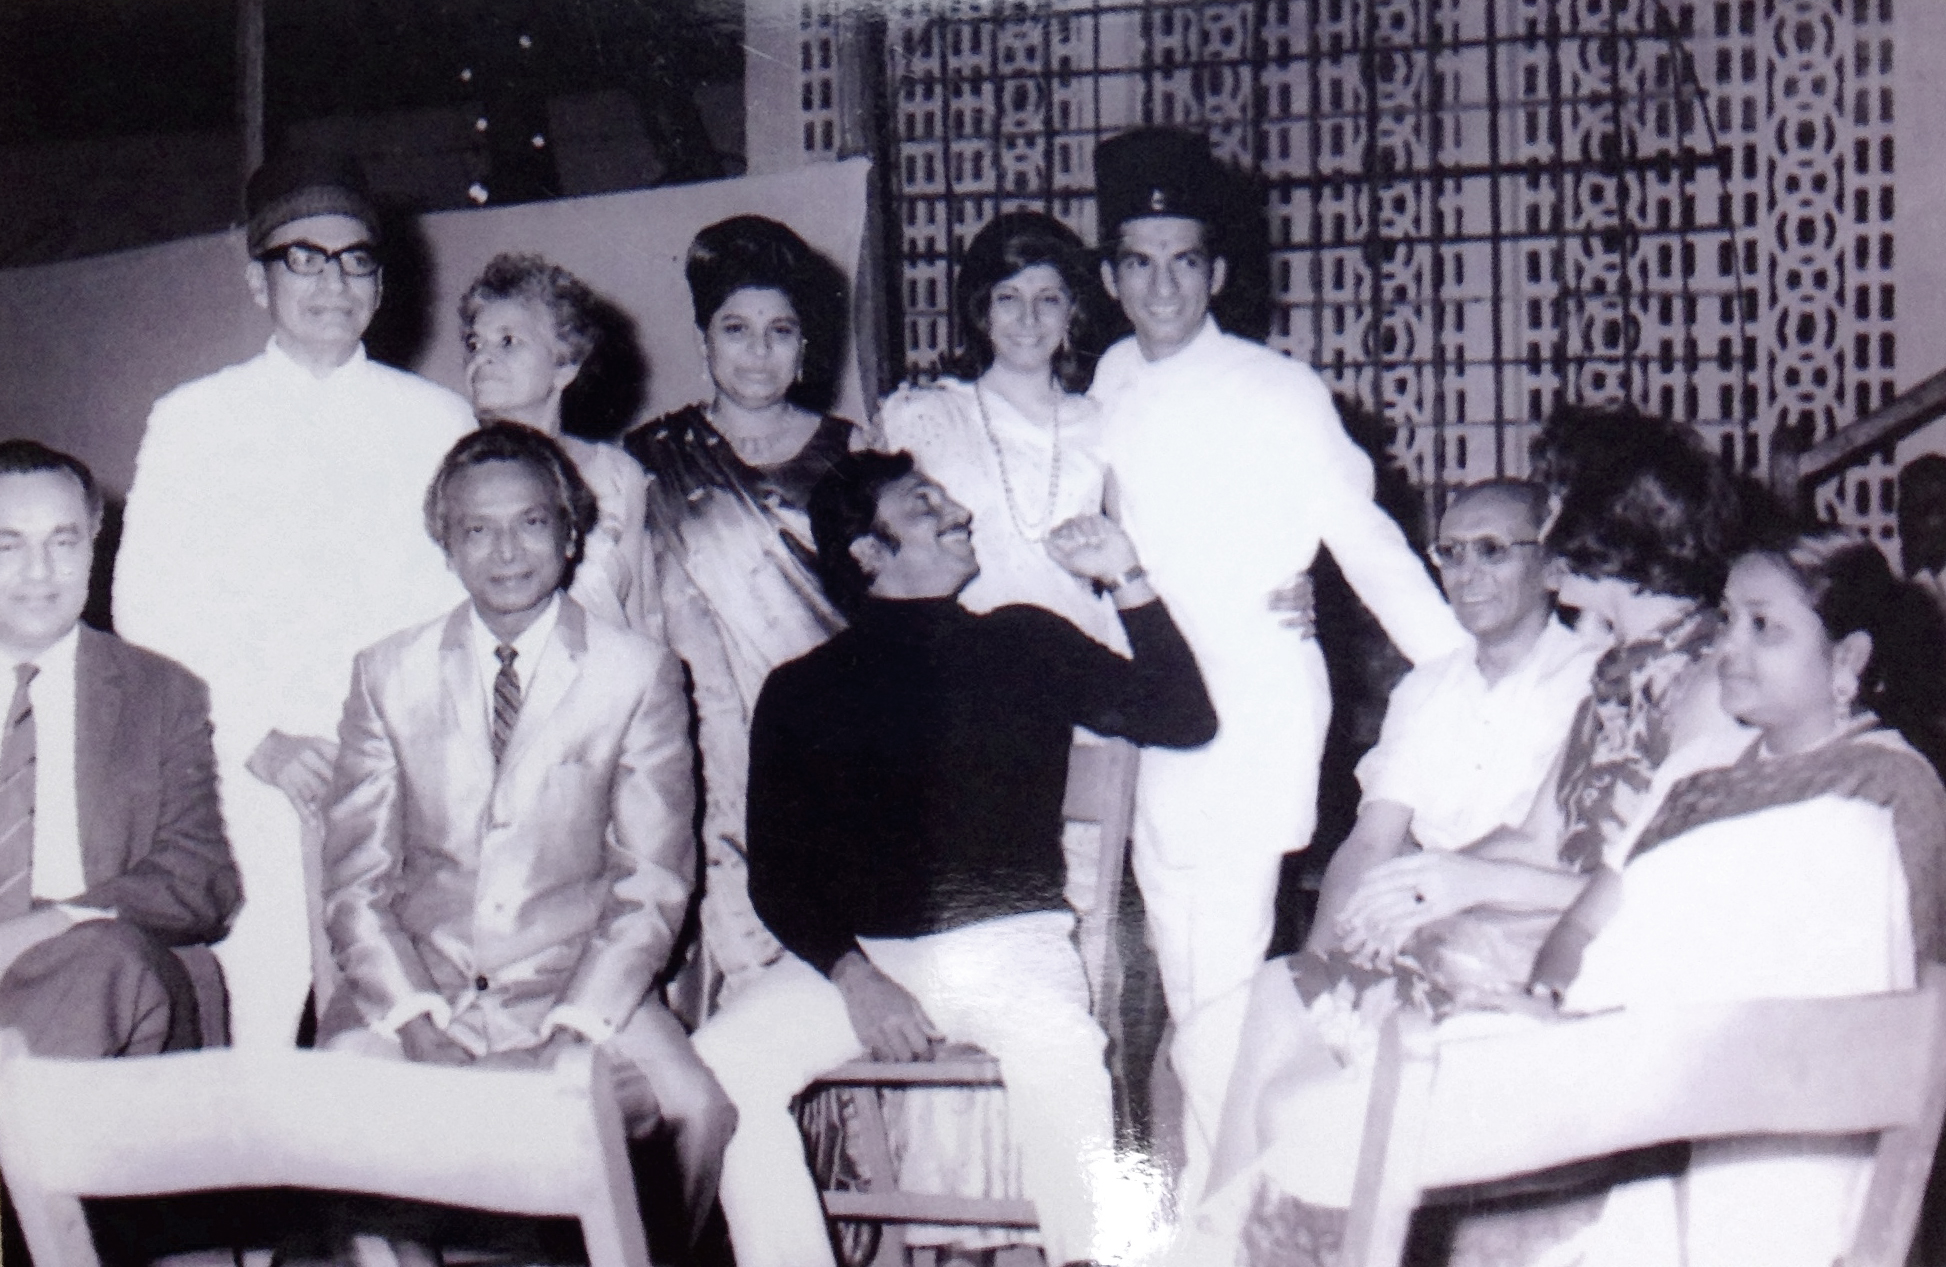 Mukesh with Naushad, Madan Mohan, Jaidev & others in a function